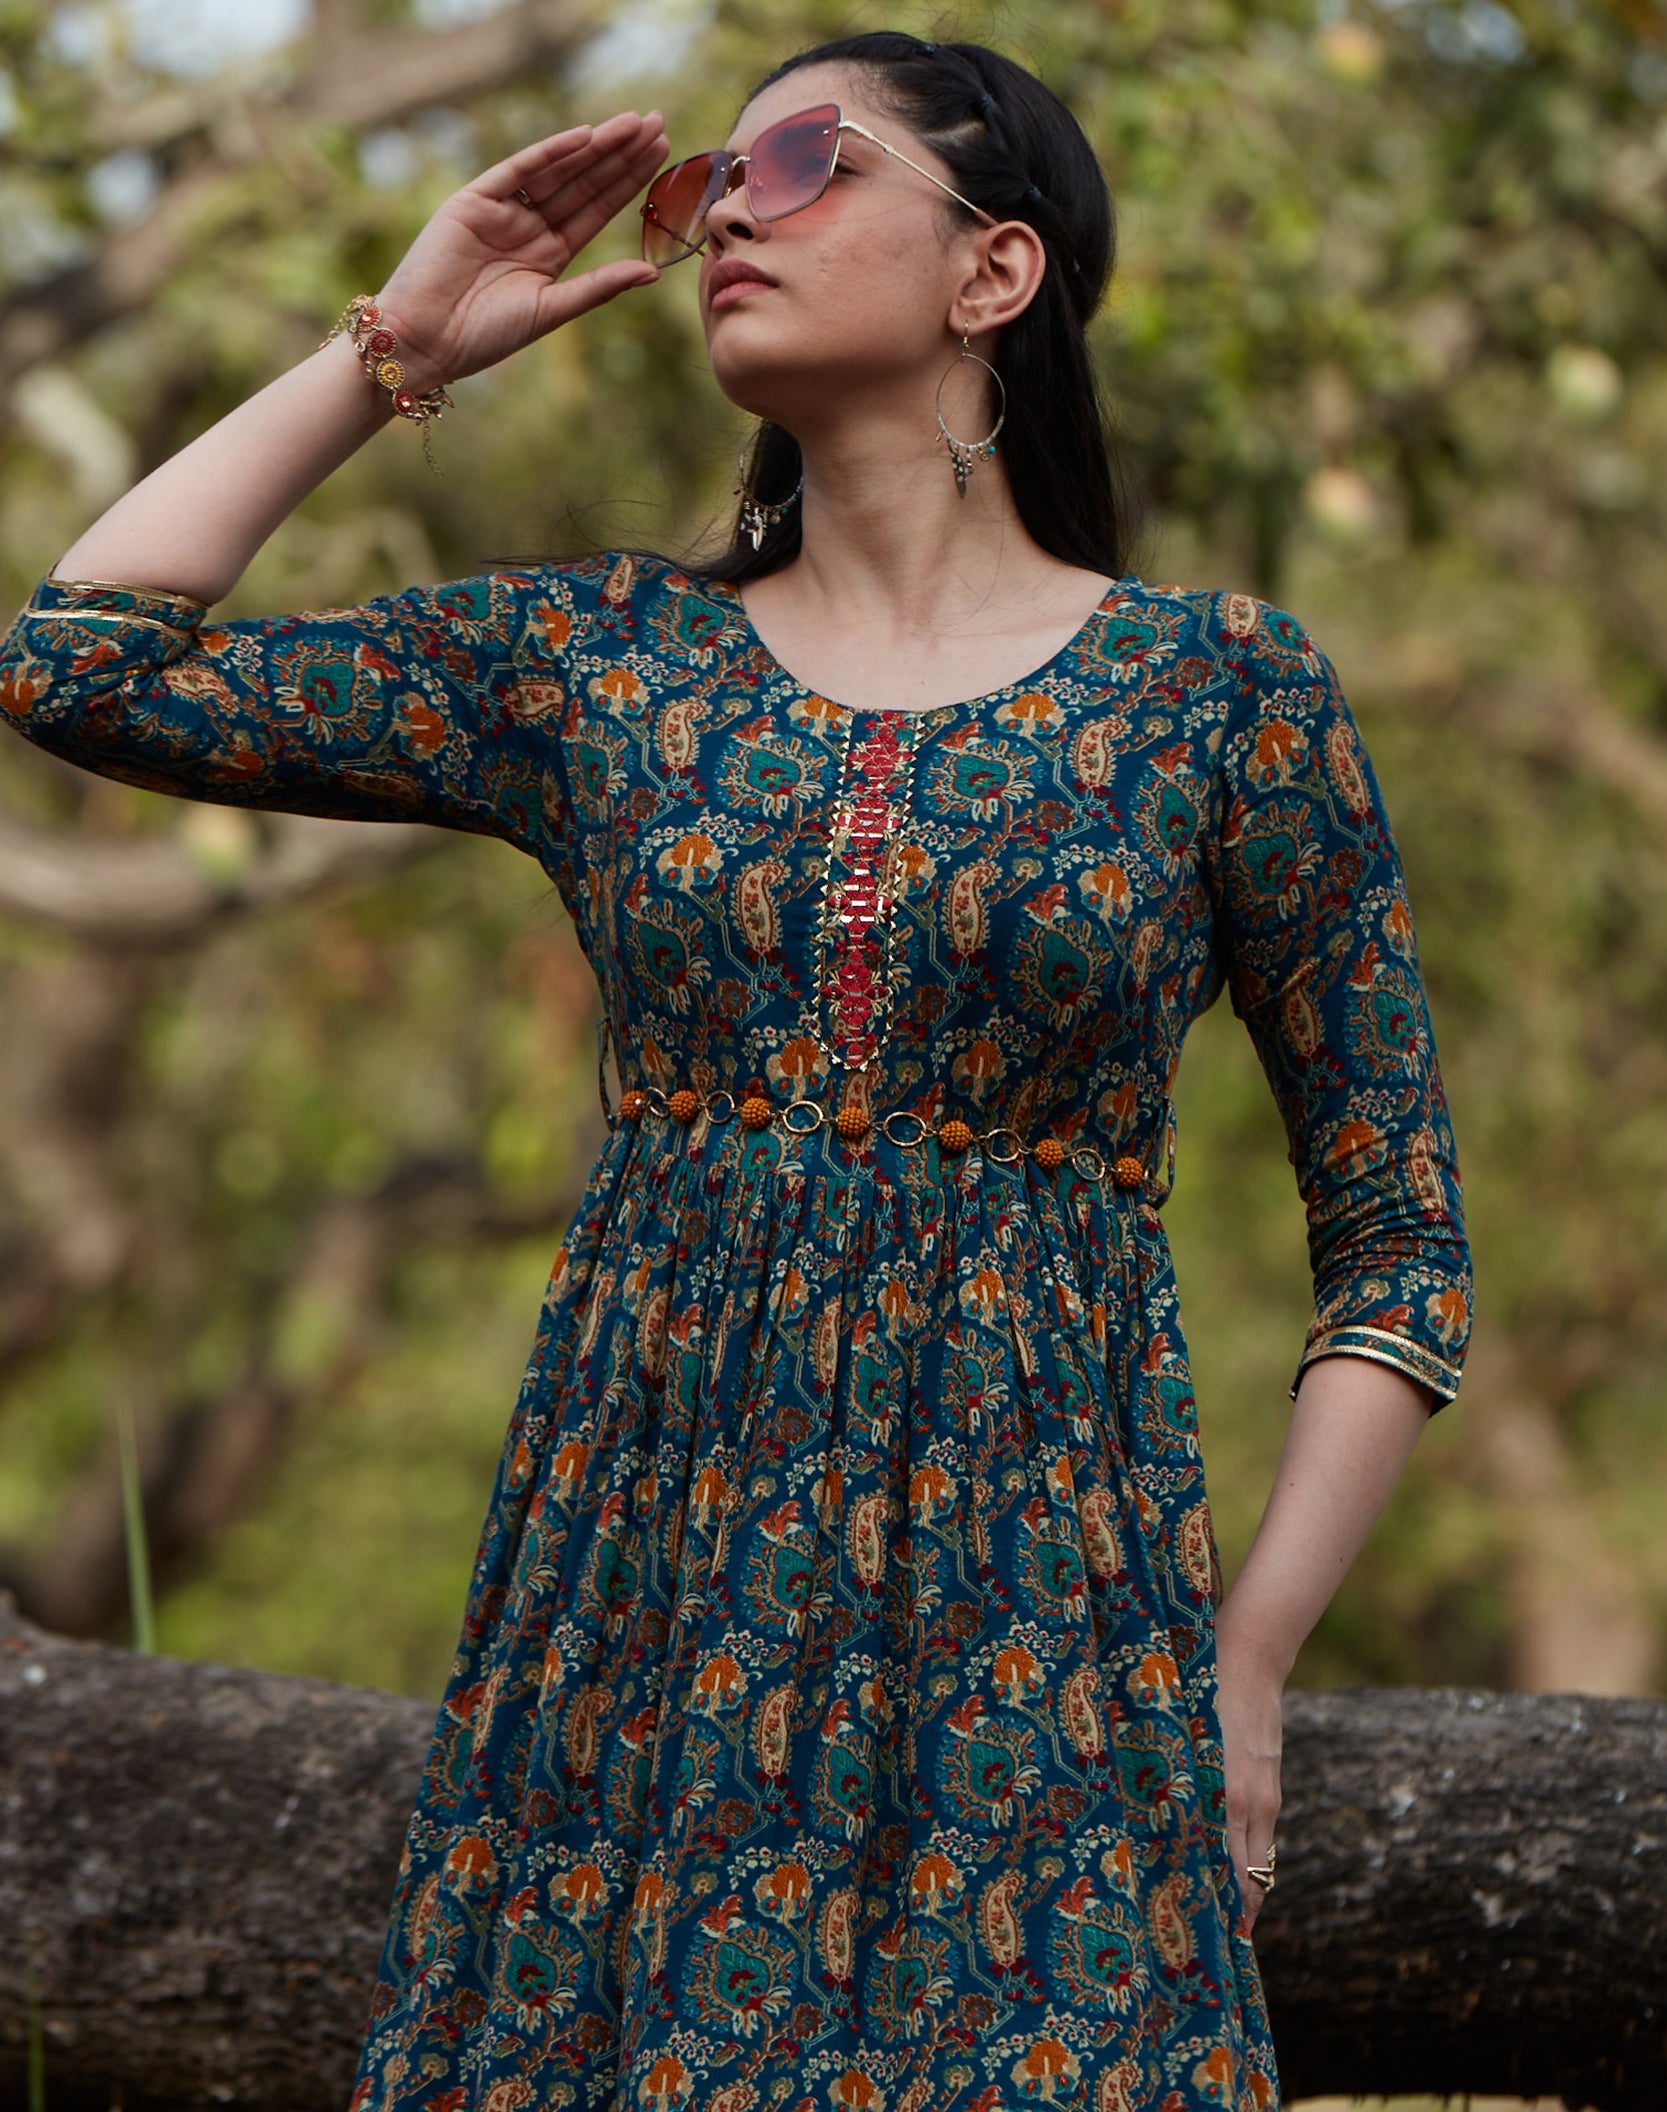 Paisley Floral Print Fit & Flared Dress - ARH884BAB